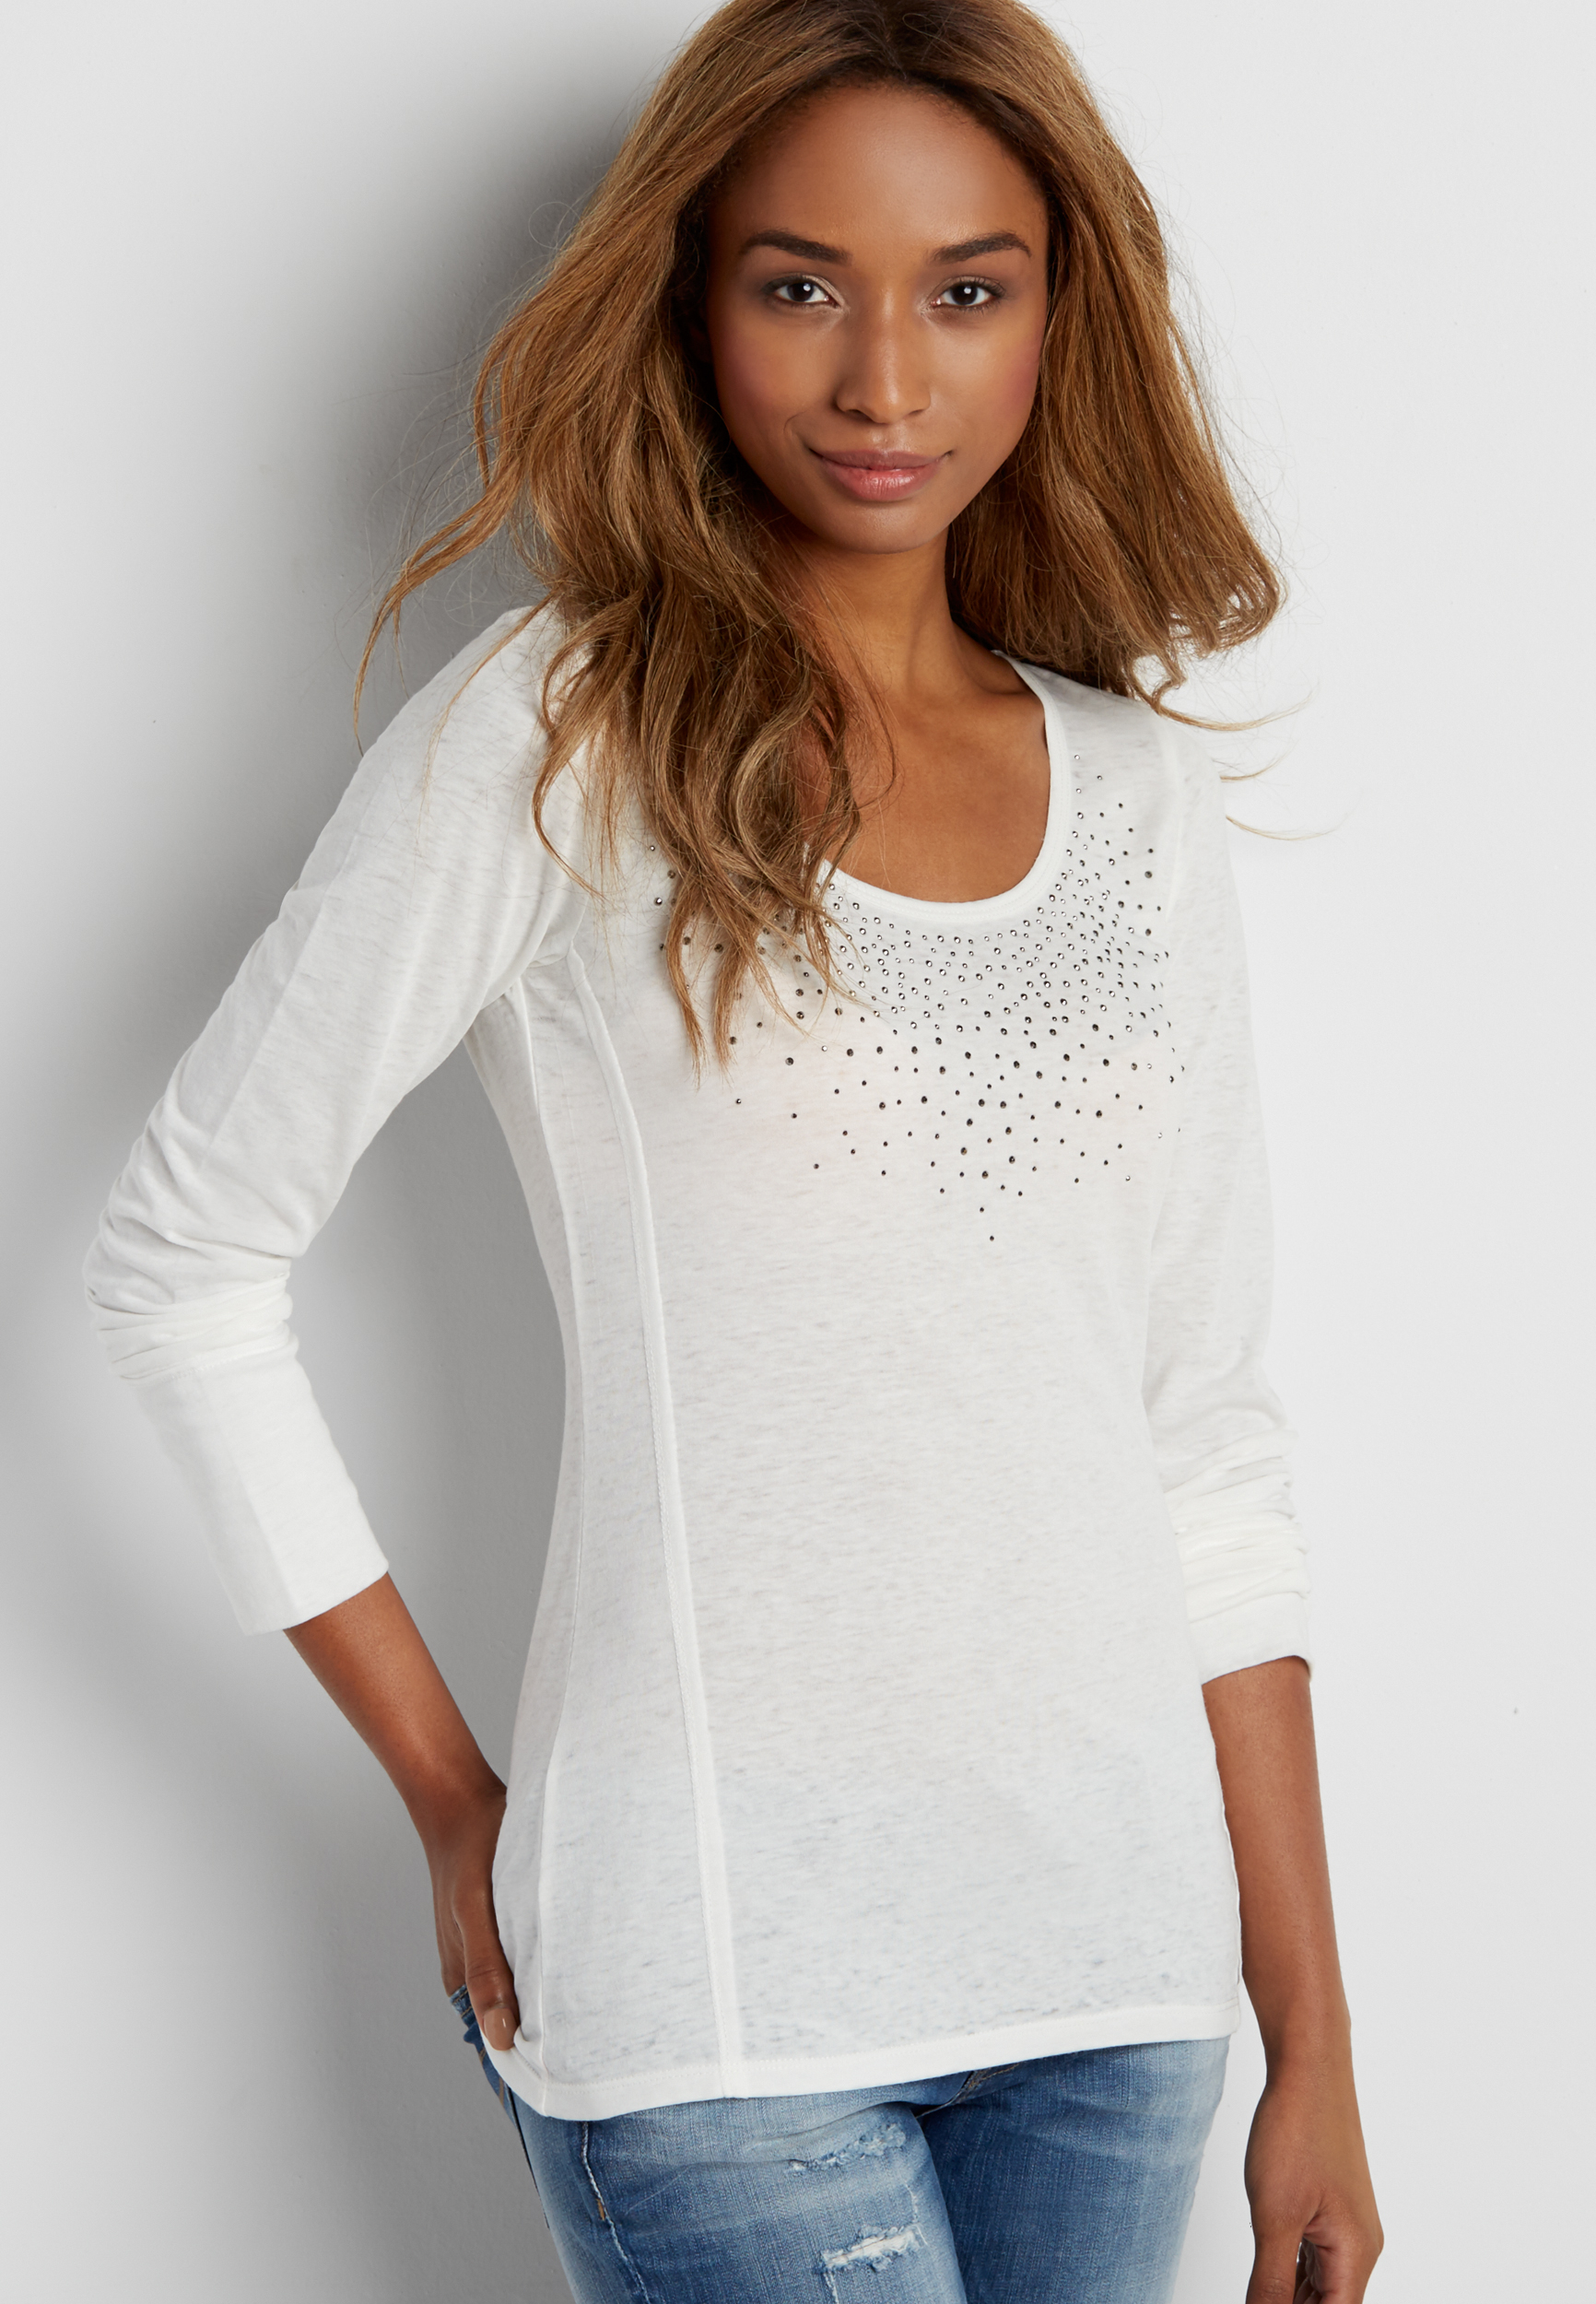 stud embellished burnout tee with long sleeves | maurices